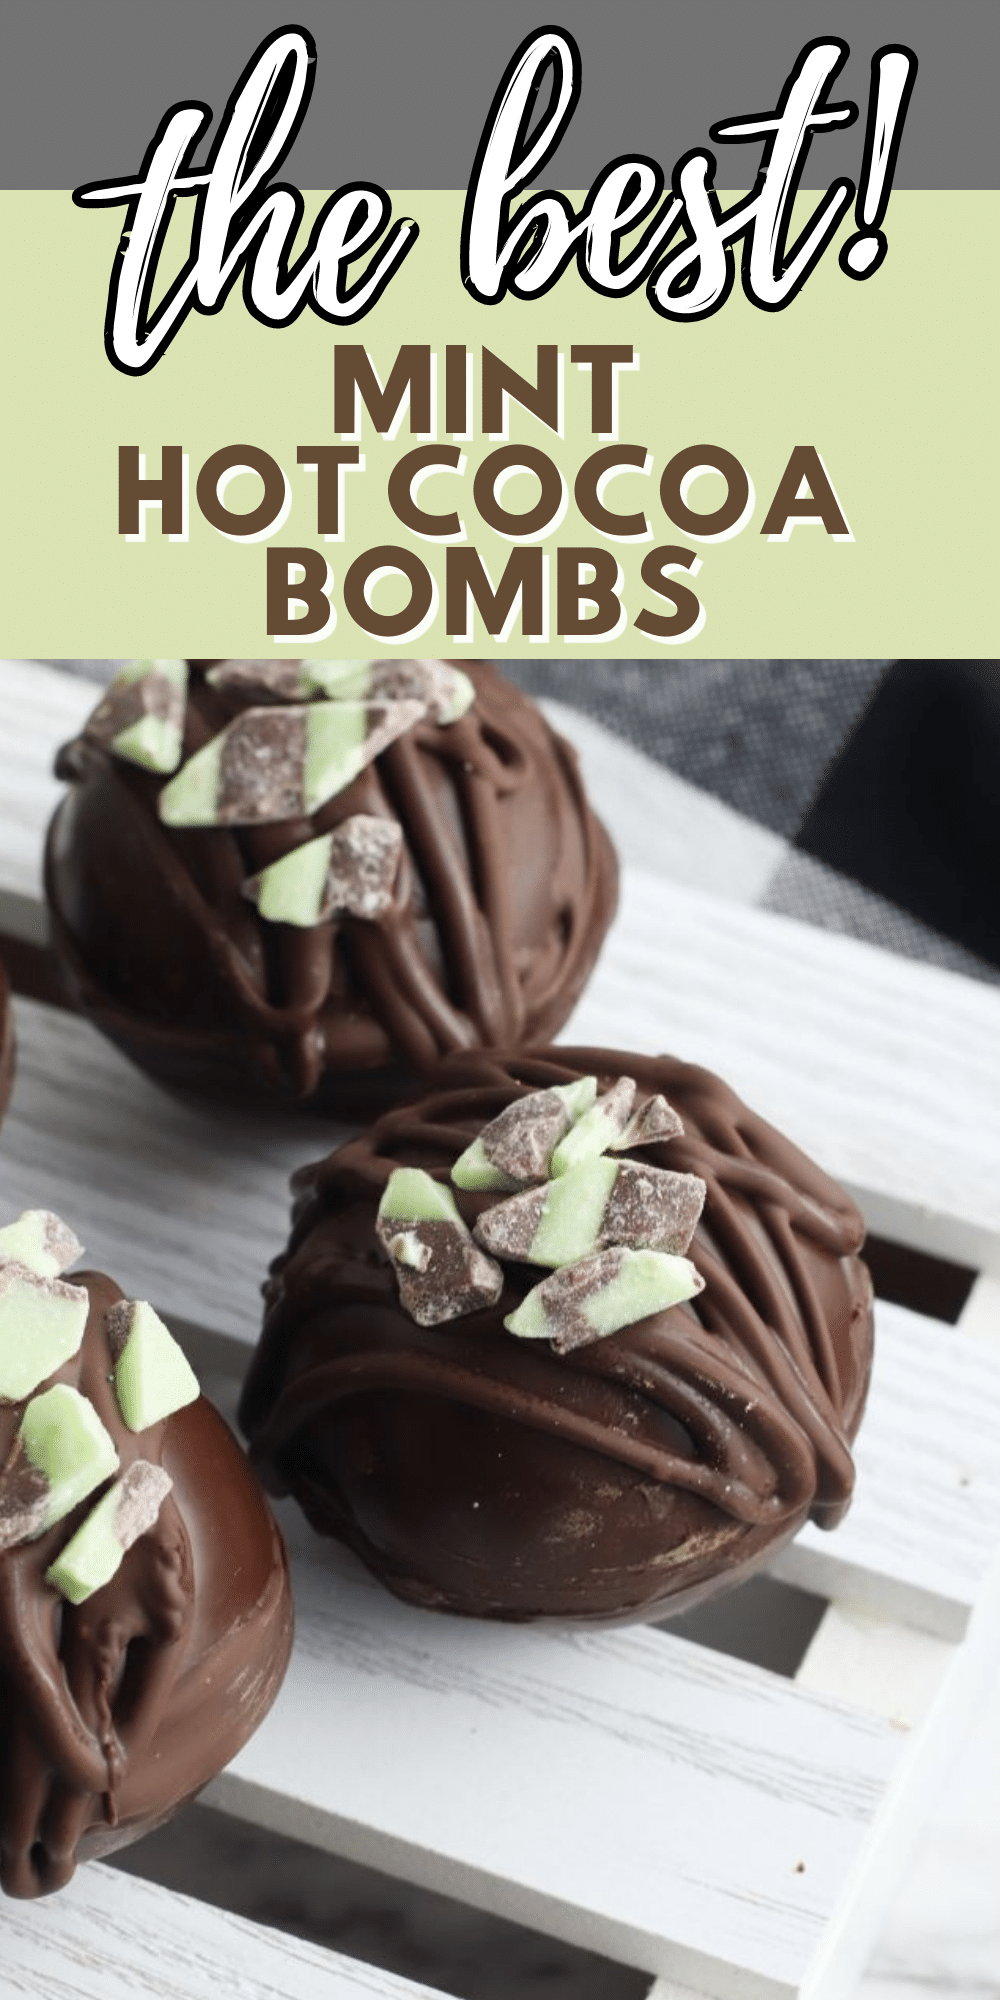 These Mint Hot Cocoa Bombs are a dream come true for mint fans. From your first sip, you're going to love this delicious and easy recipe! #hotcocoabombs #hotcocoa #mint #dessert #recipe via @wondermomwannab